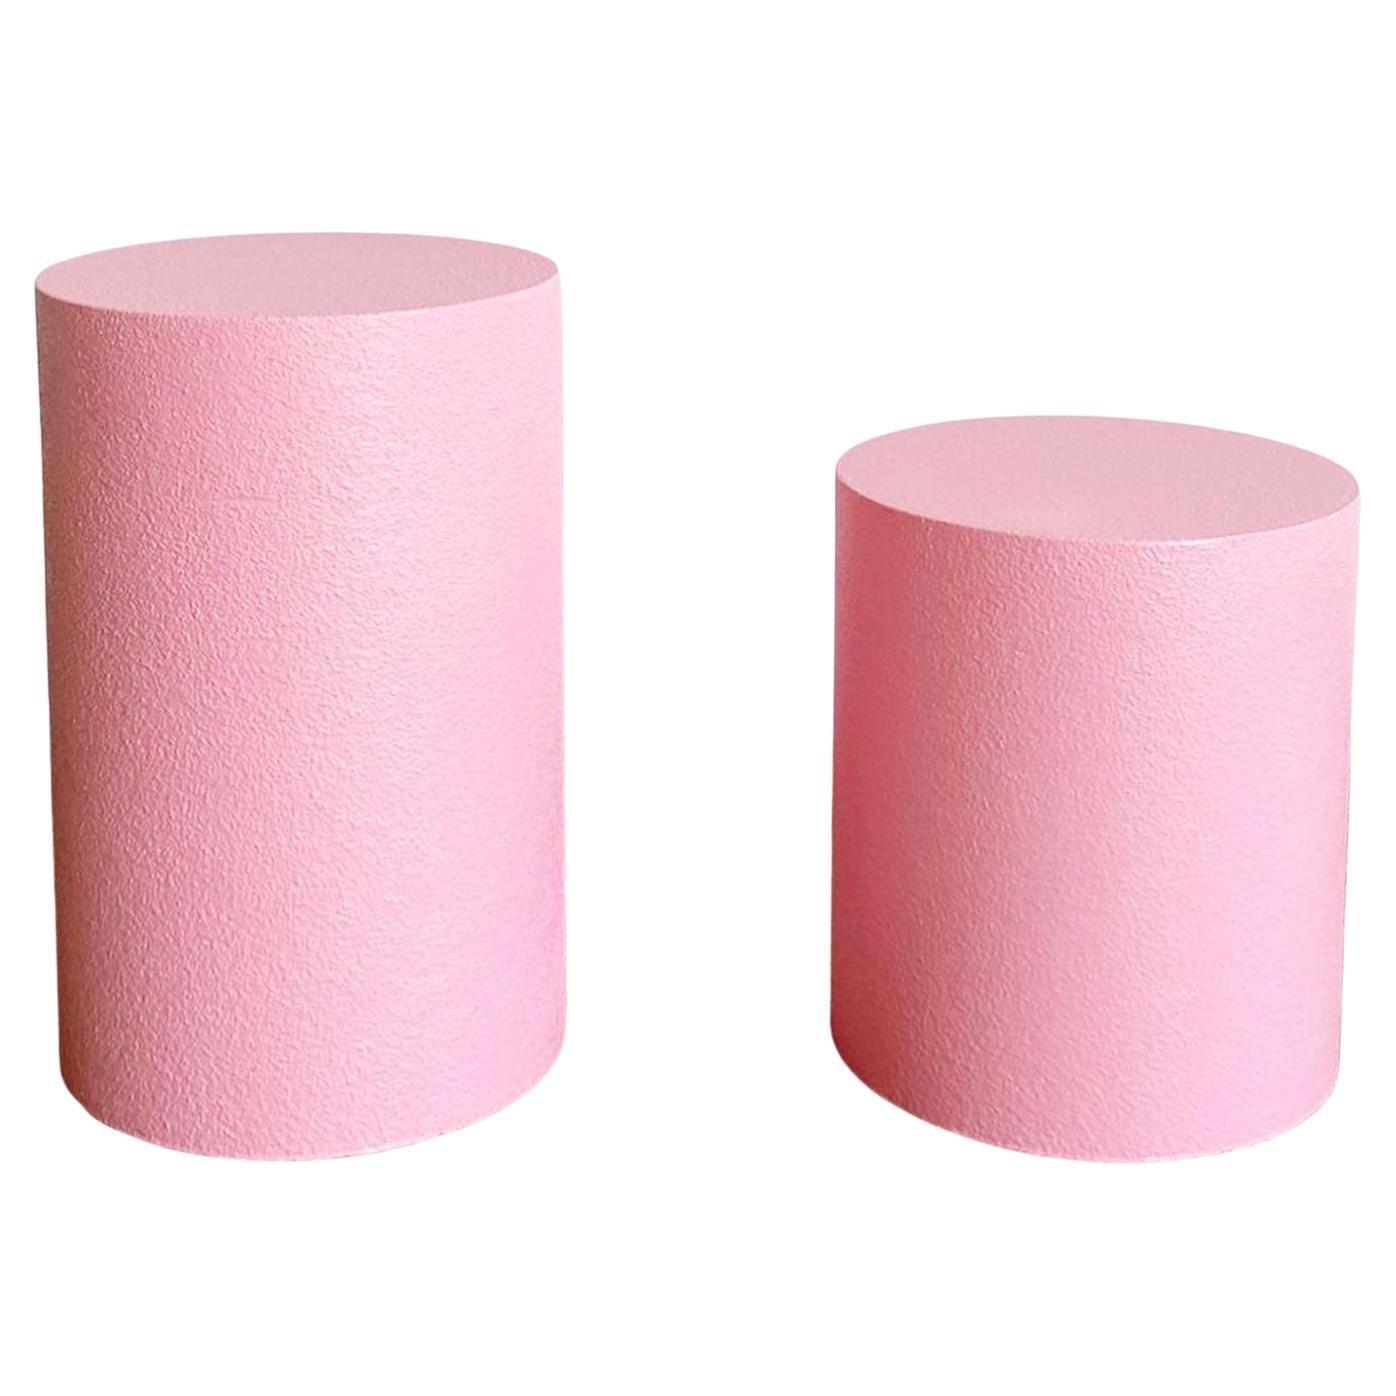 Postmodern Pink Textured Finish Cylindrical Pedestals - a Pair For Sale